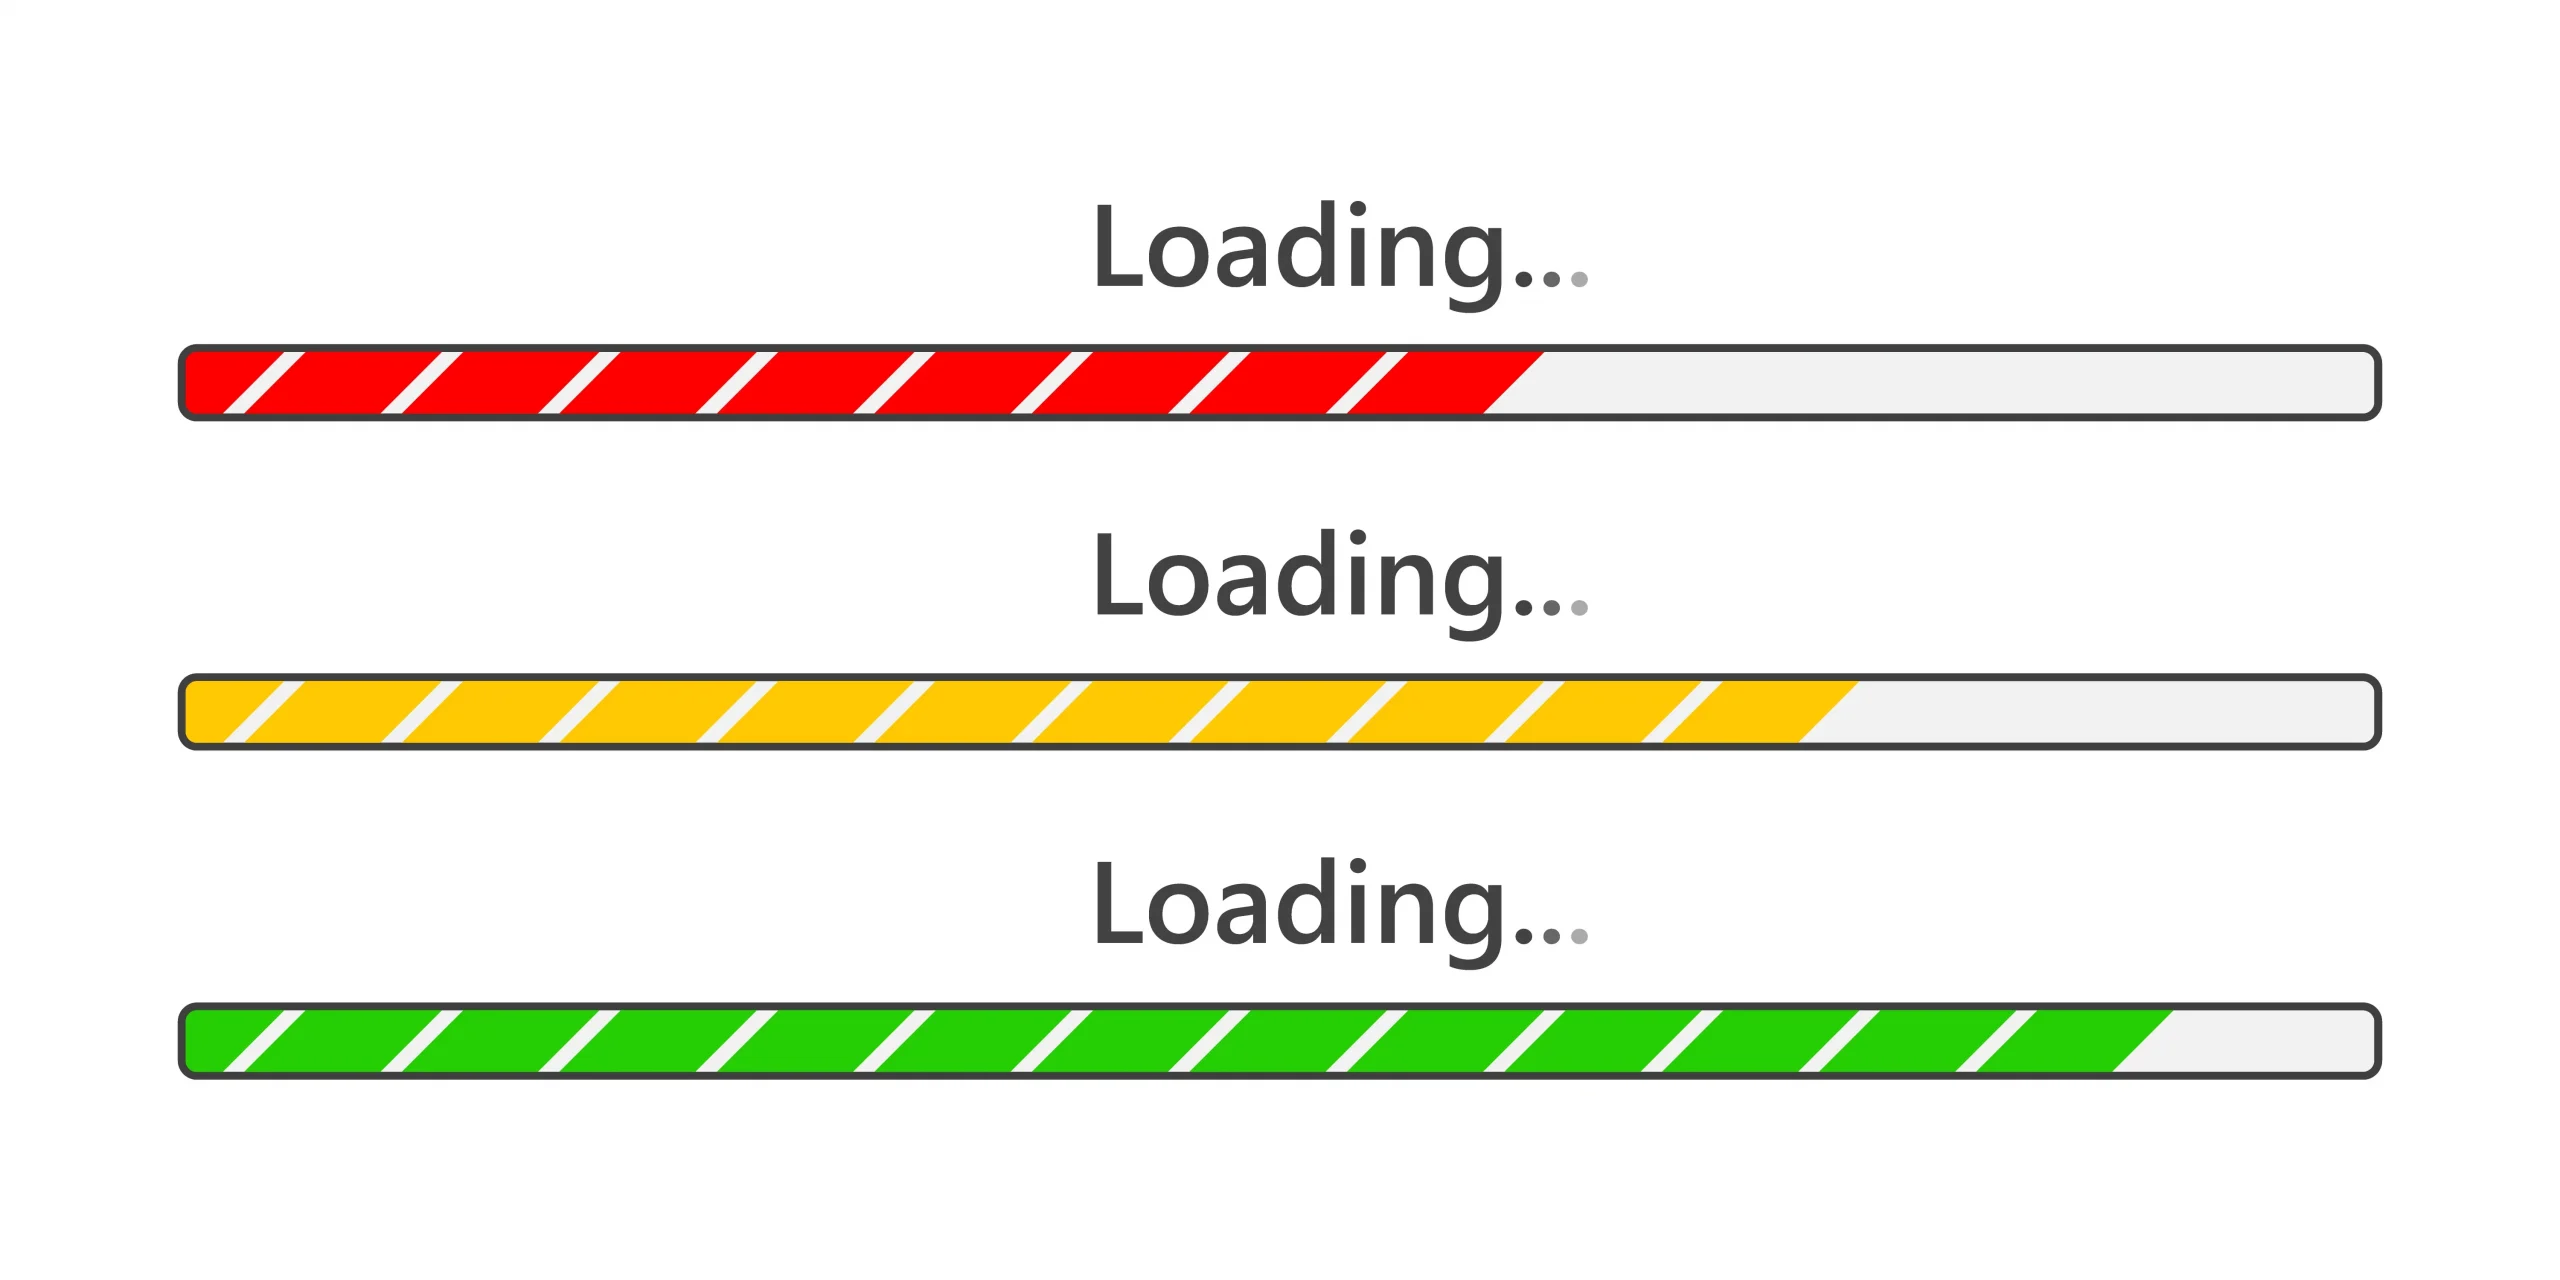 loading bars in red, yellow and green